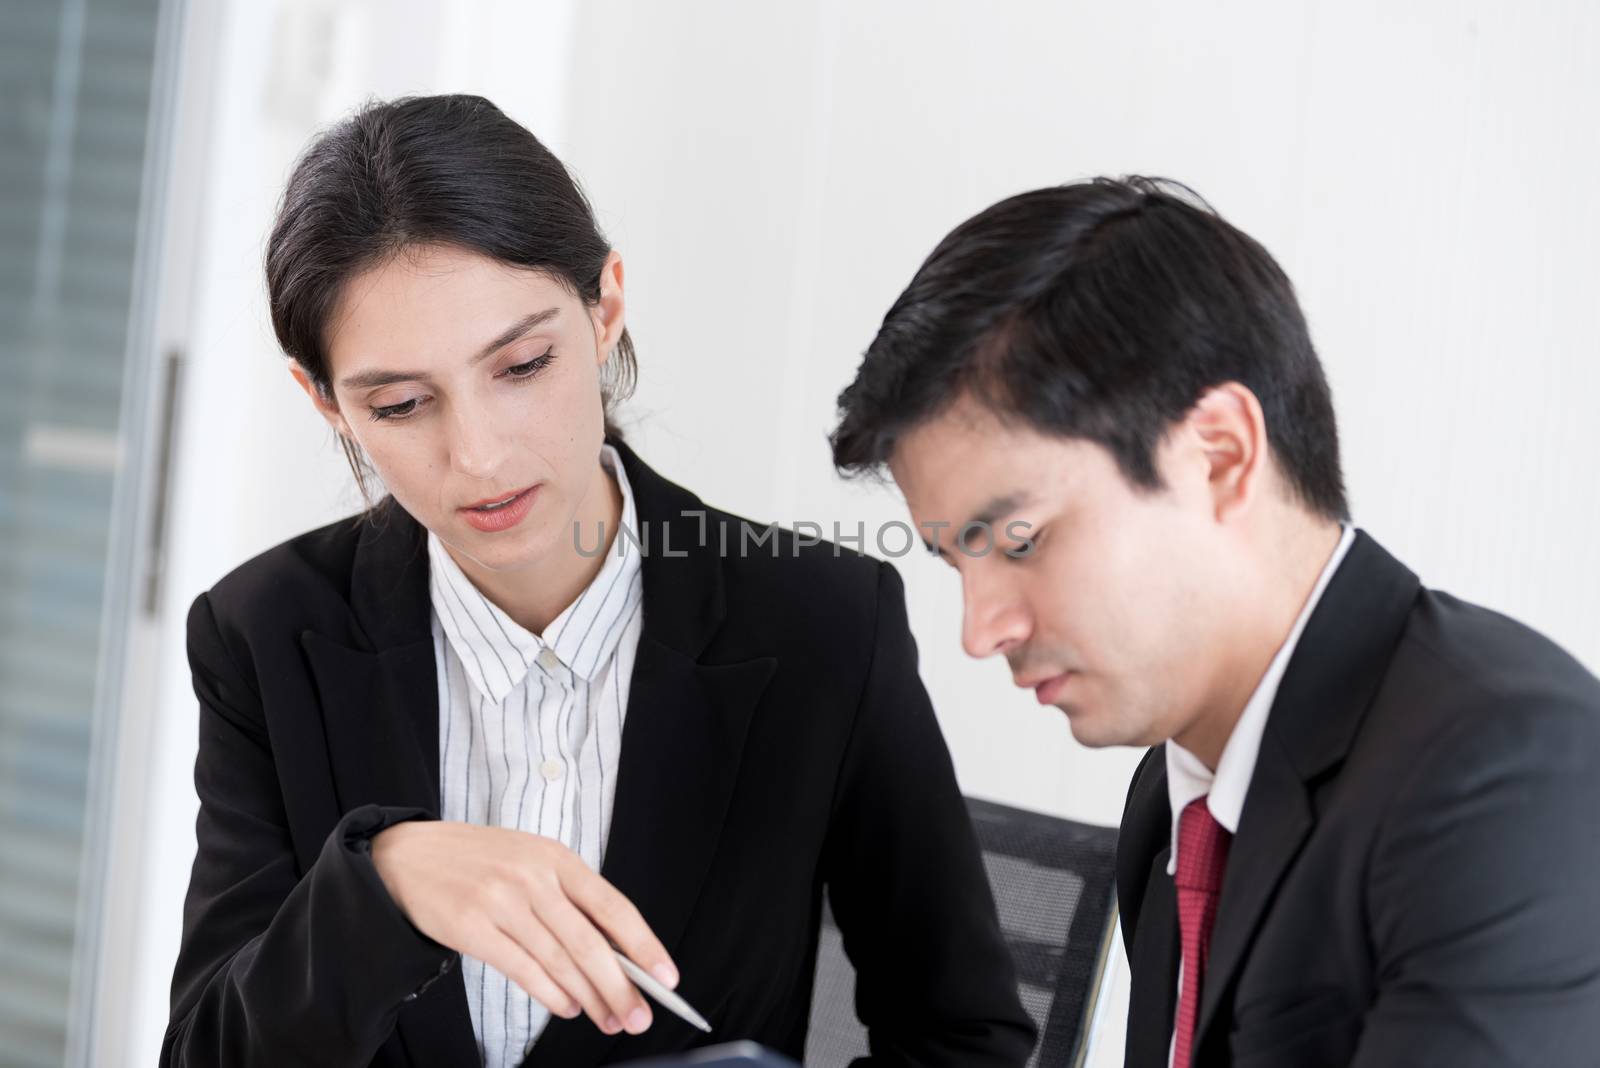 A manager and secretary working together in the office.